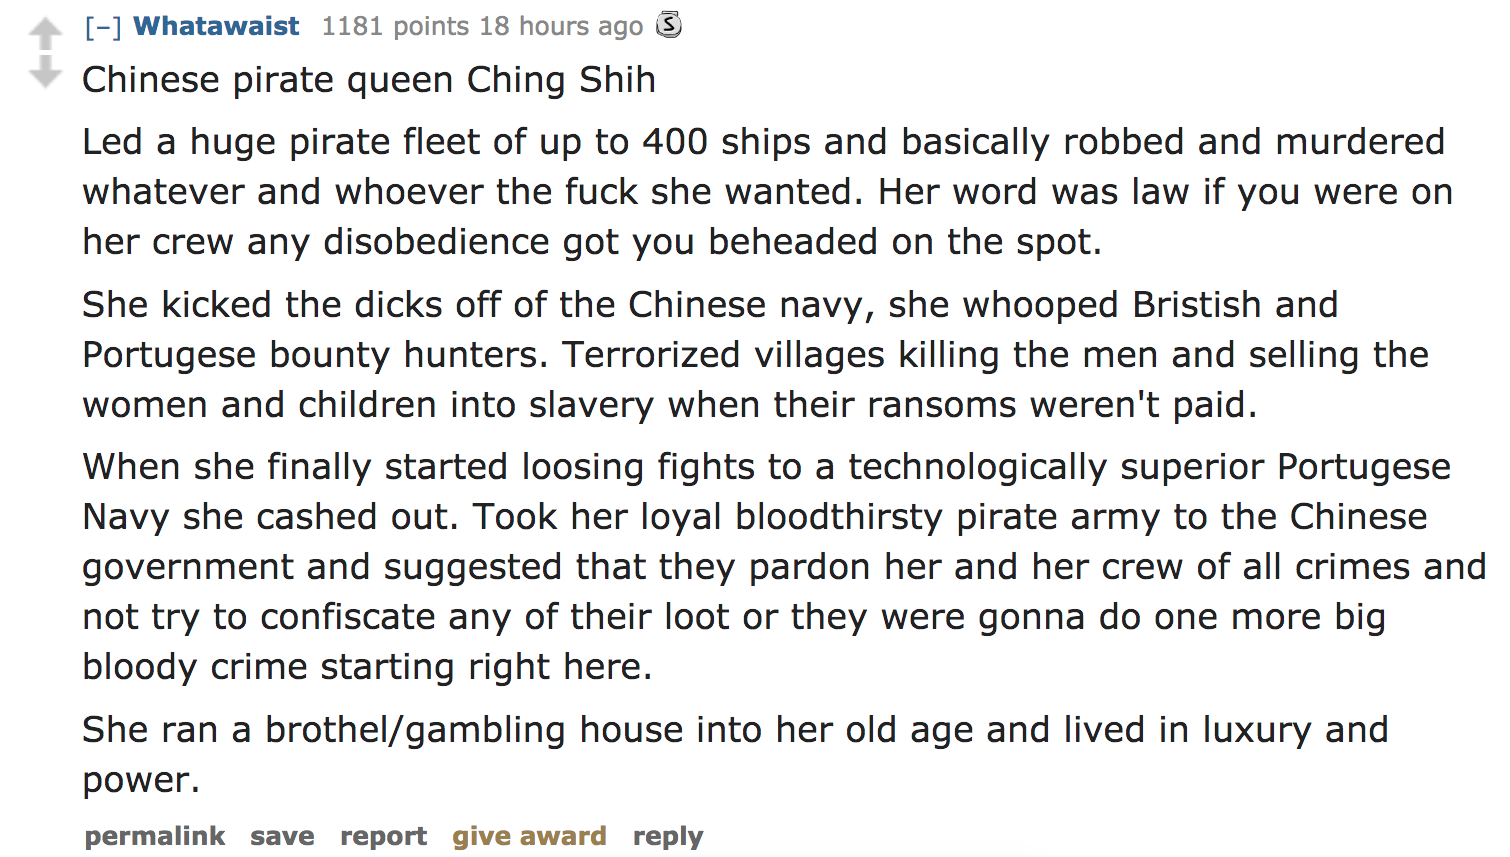 ask reddit - Chinese pirate queen Ching Shih Led a huge pirate fleet of up to 400 ships and basically robbed and murdered whatever and whoever the fuck she wanted. Her word was law if you were on her crew a